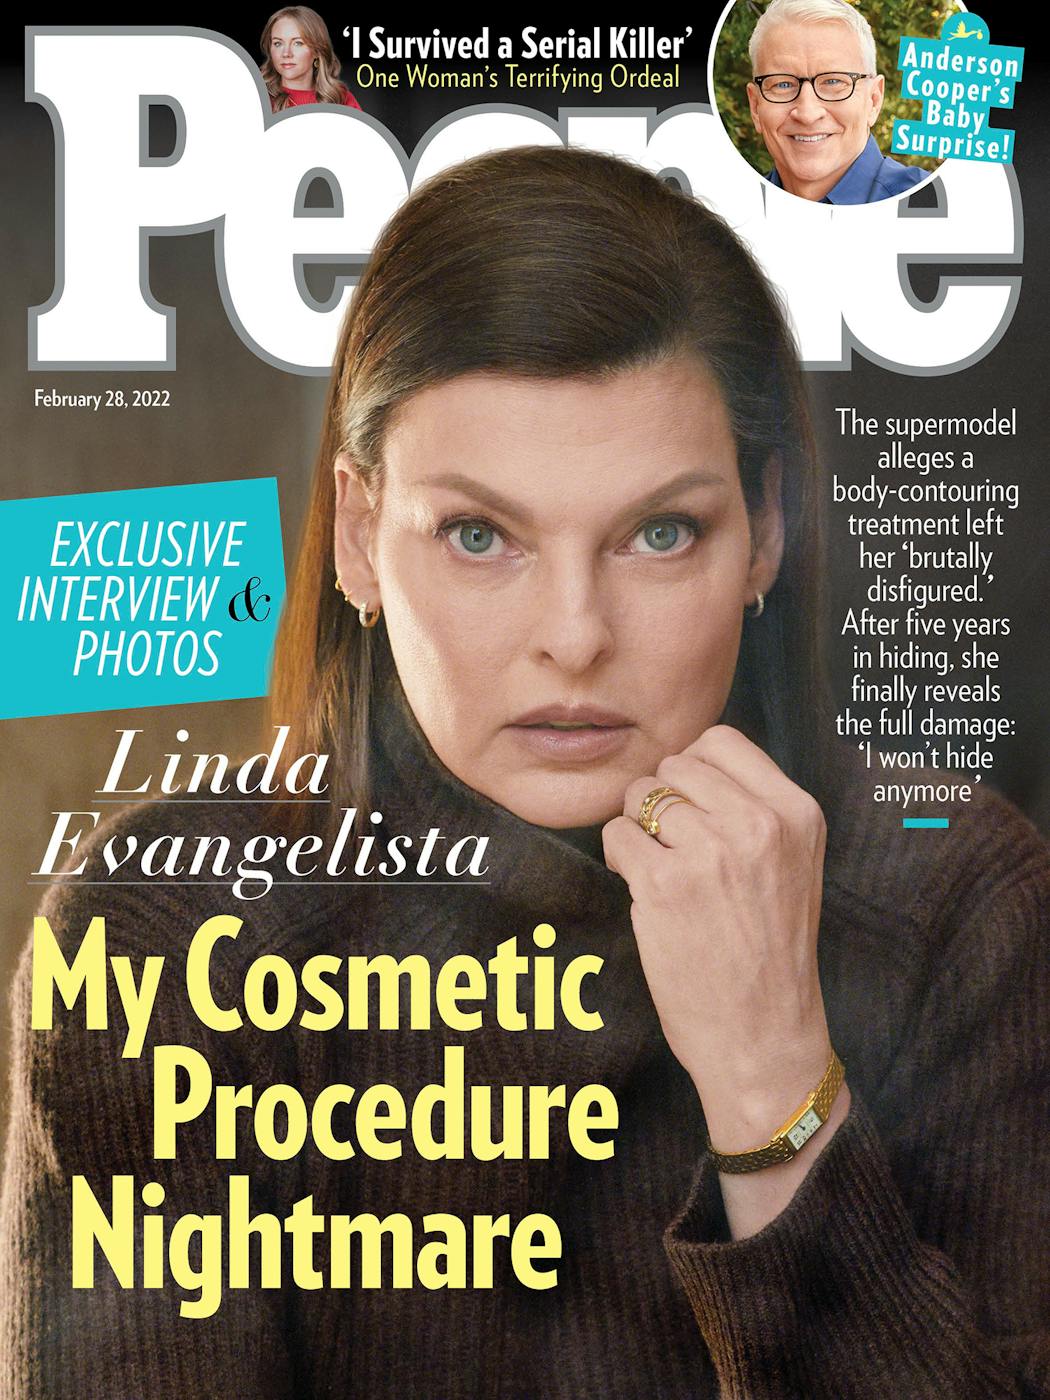 Linda Evangelista appears on the cover of People magazine.